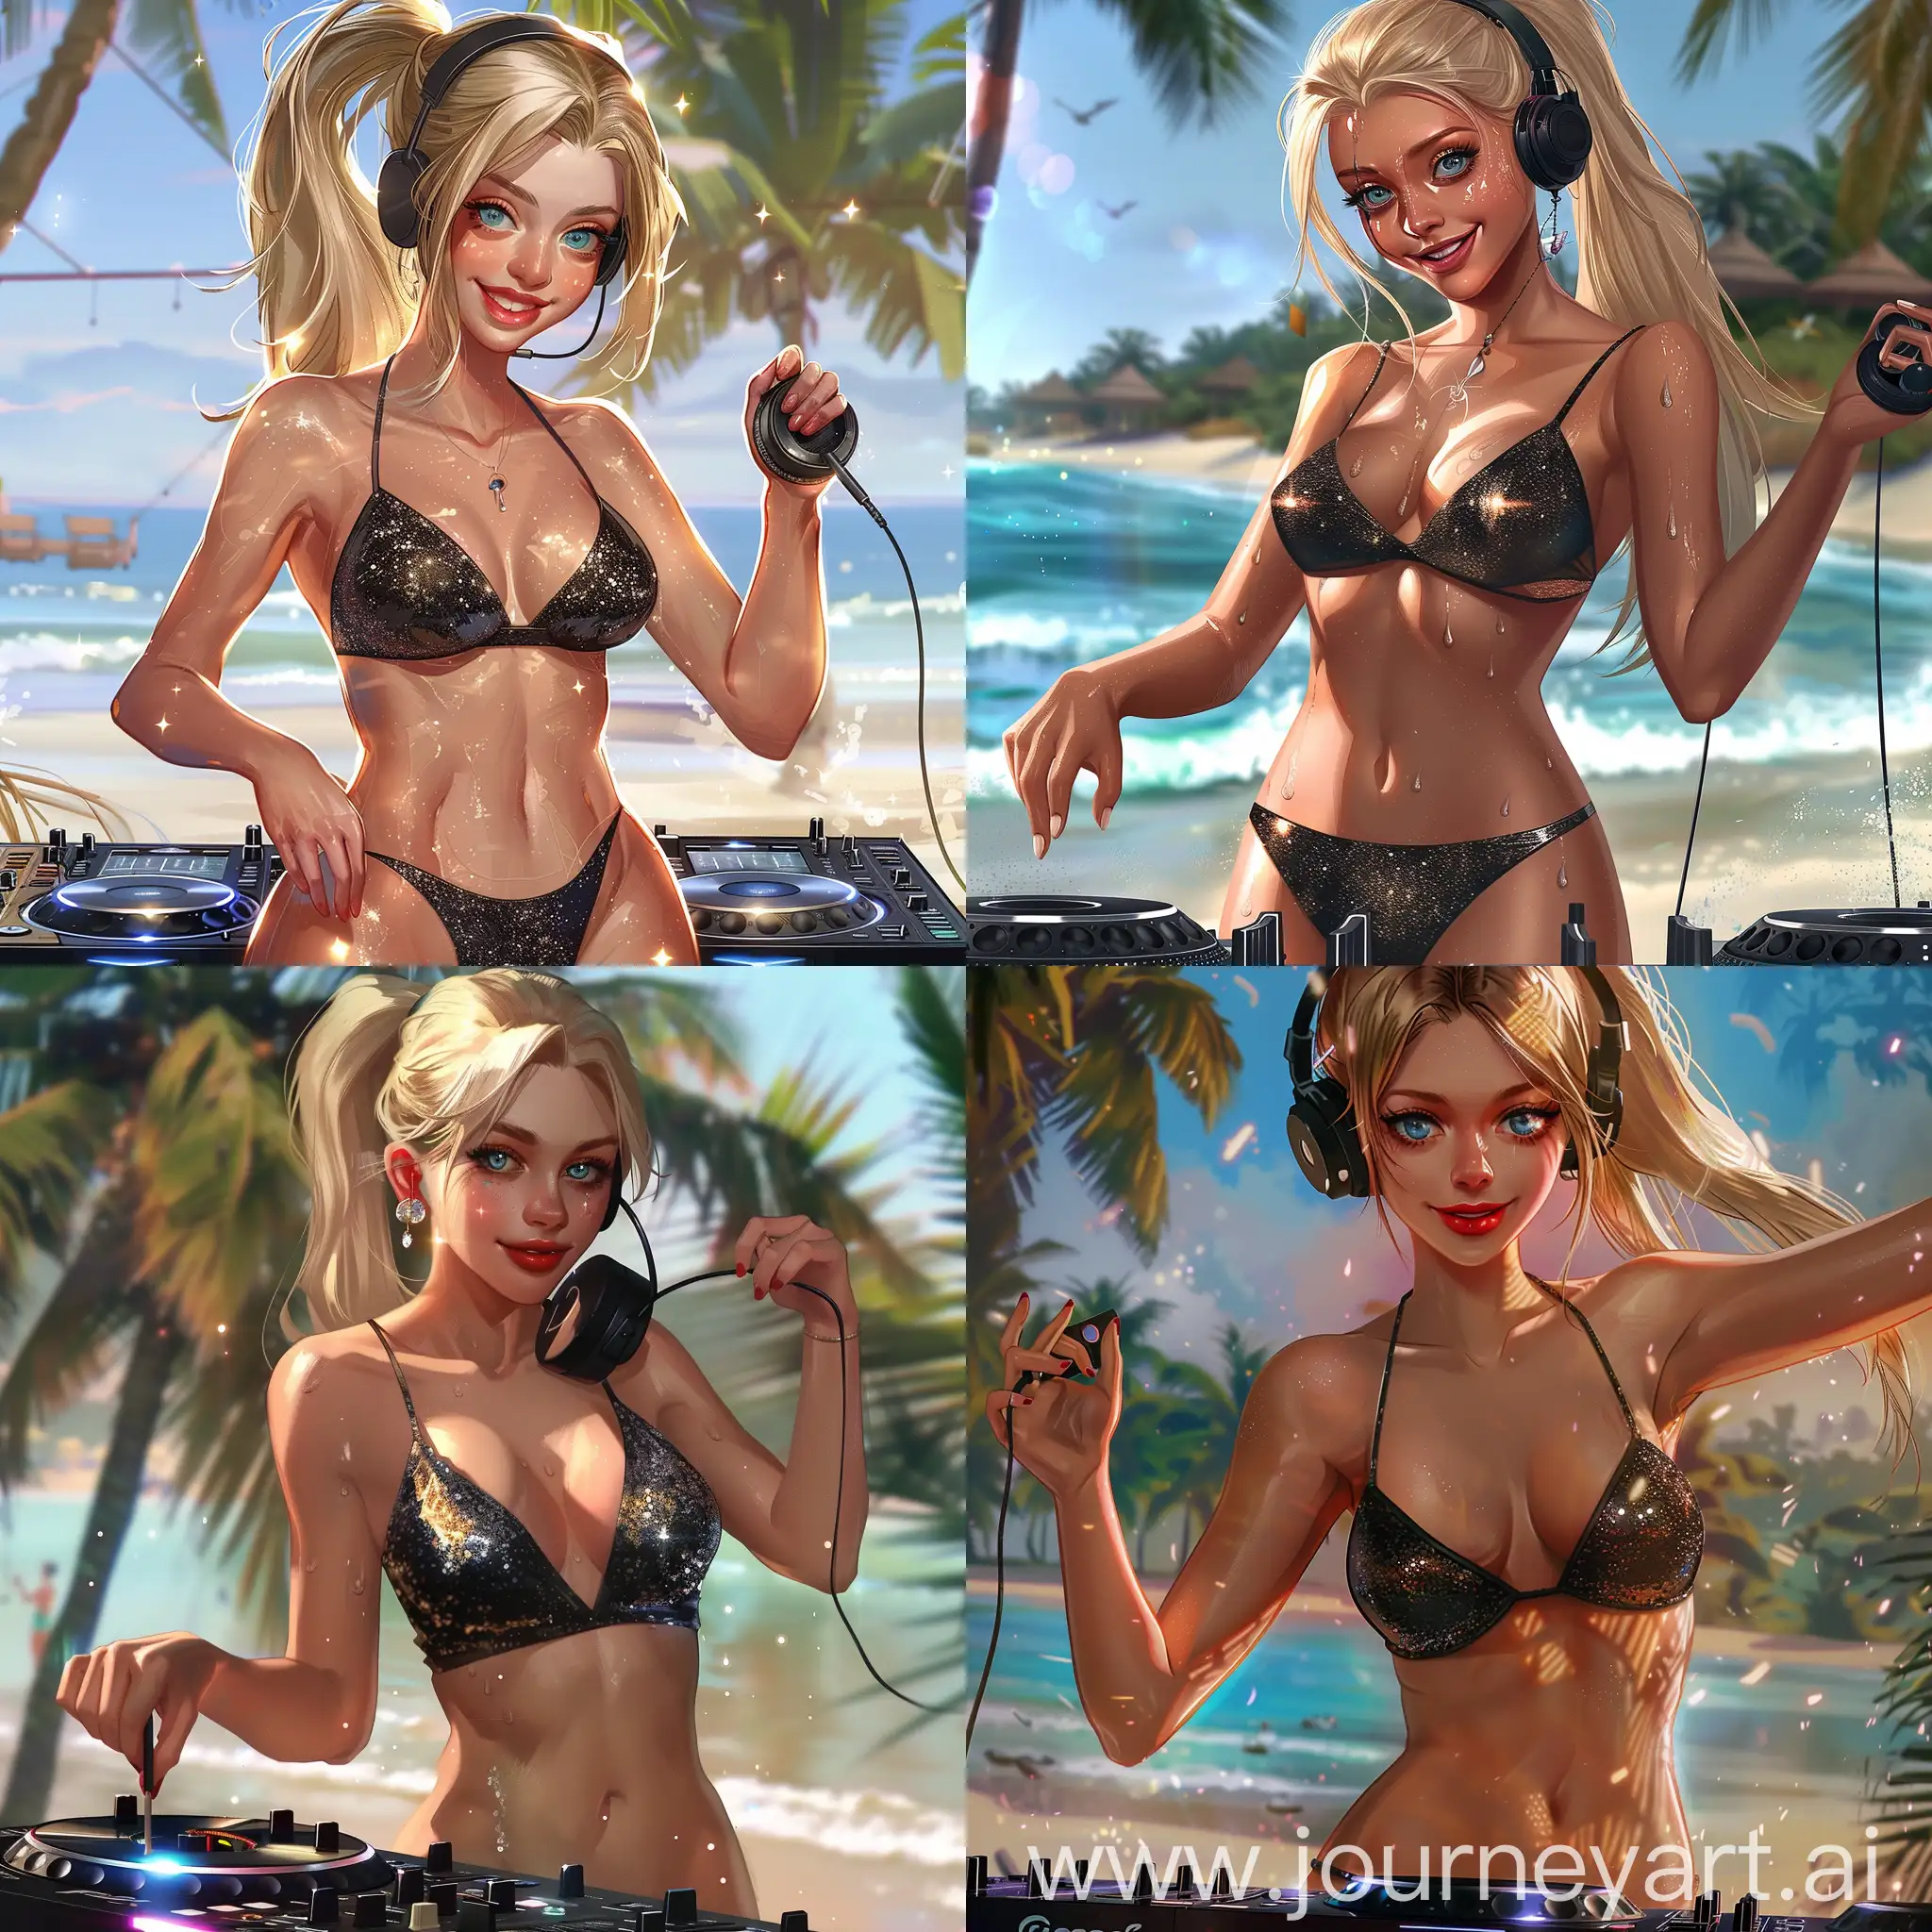 Blond-Woman-DJ-Mixing-at-Beach-Party